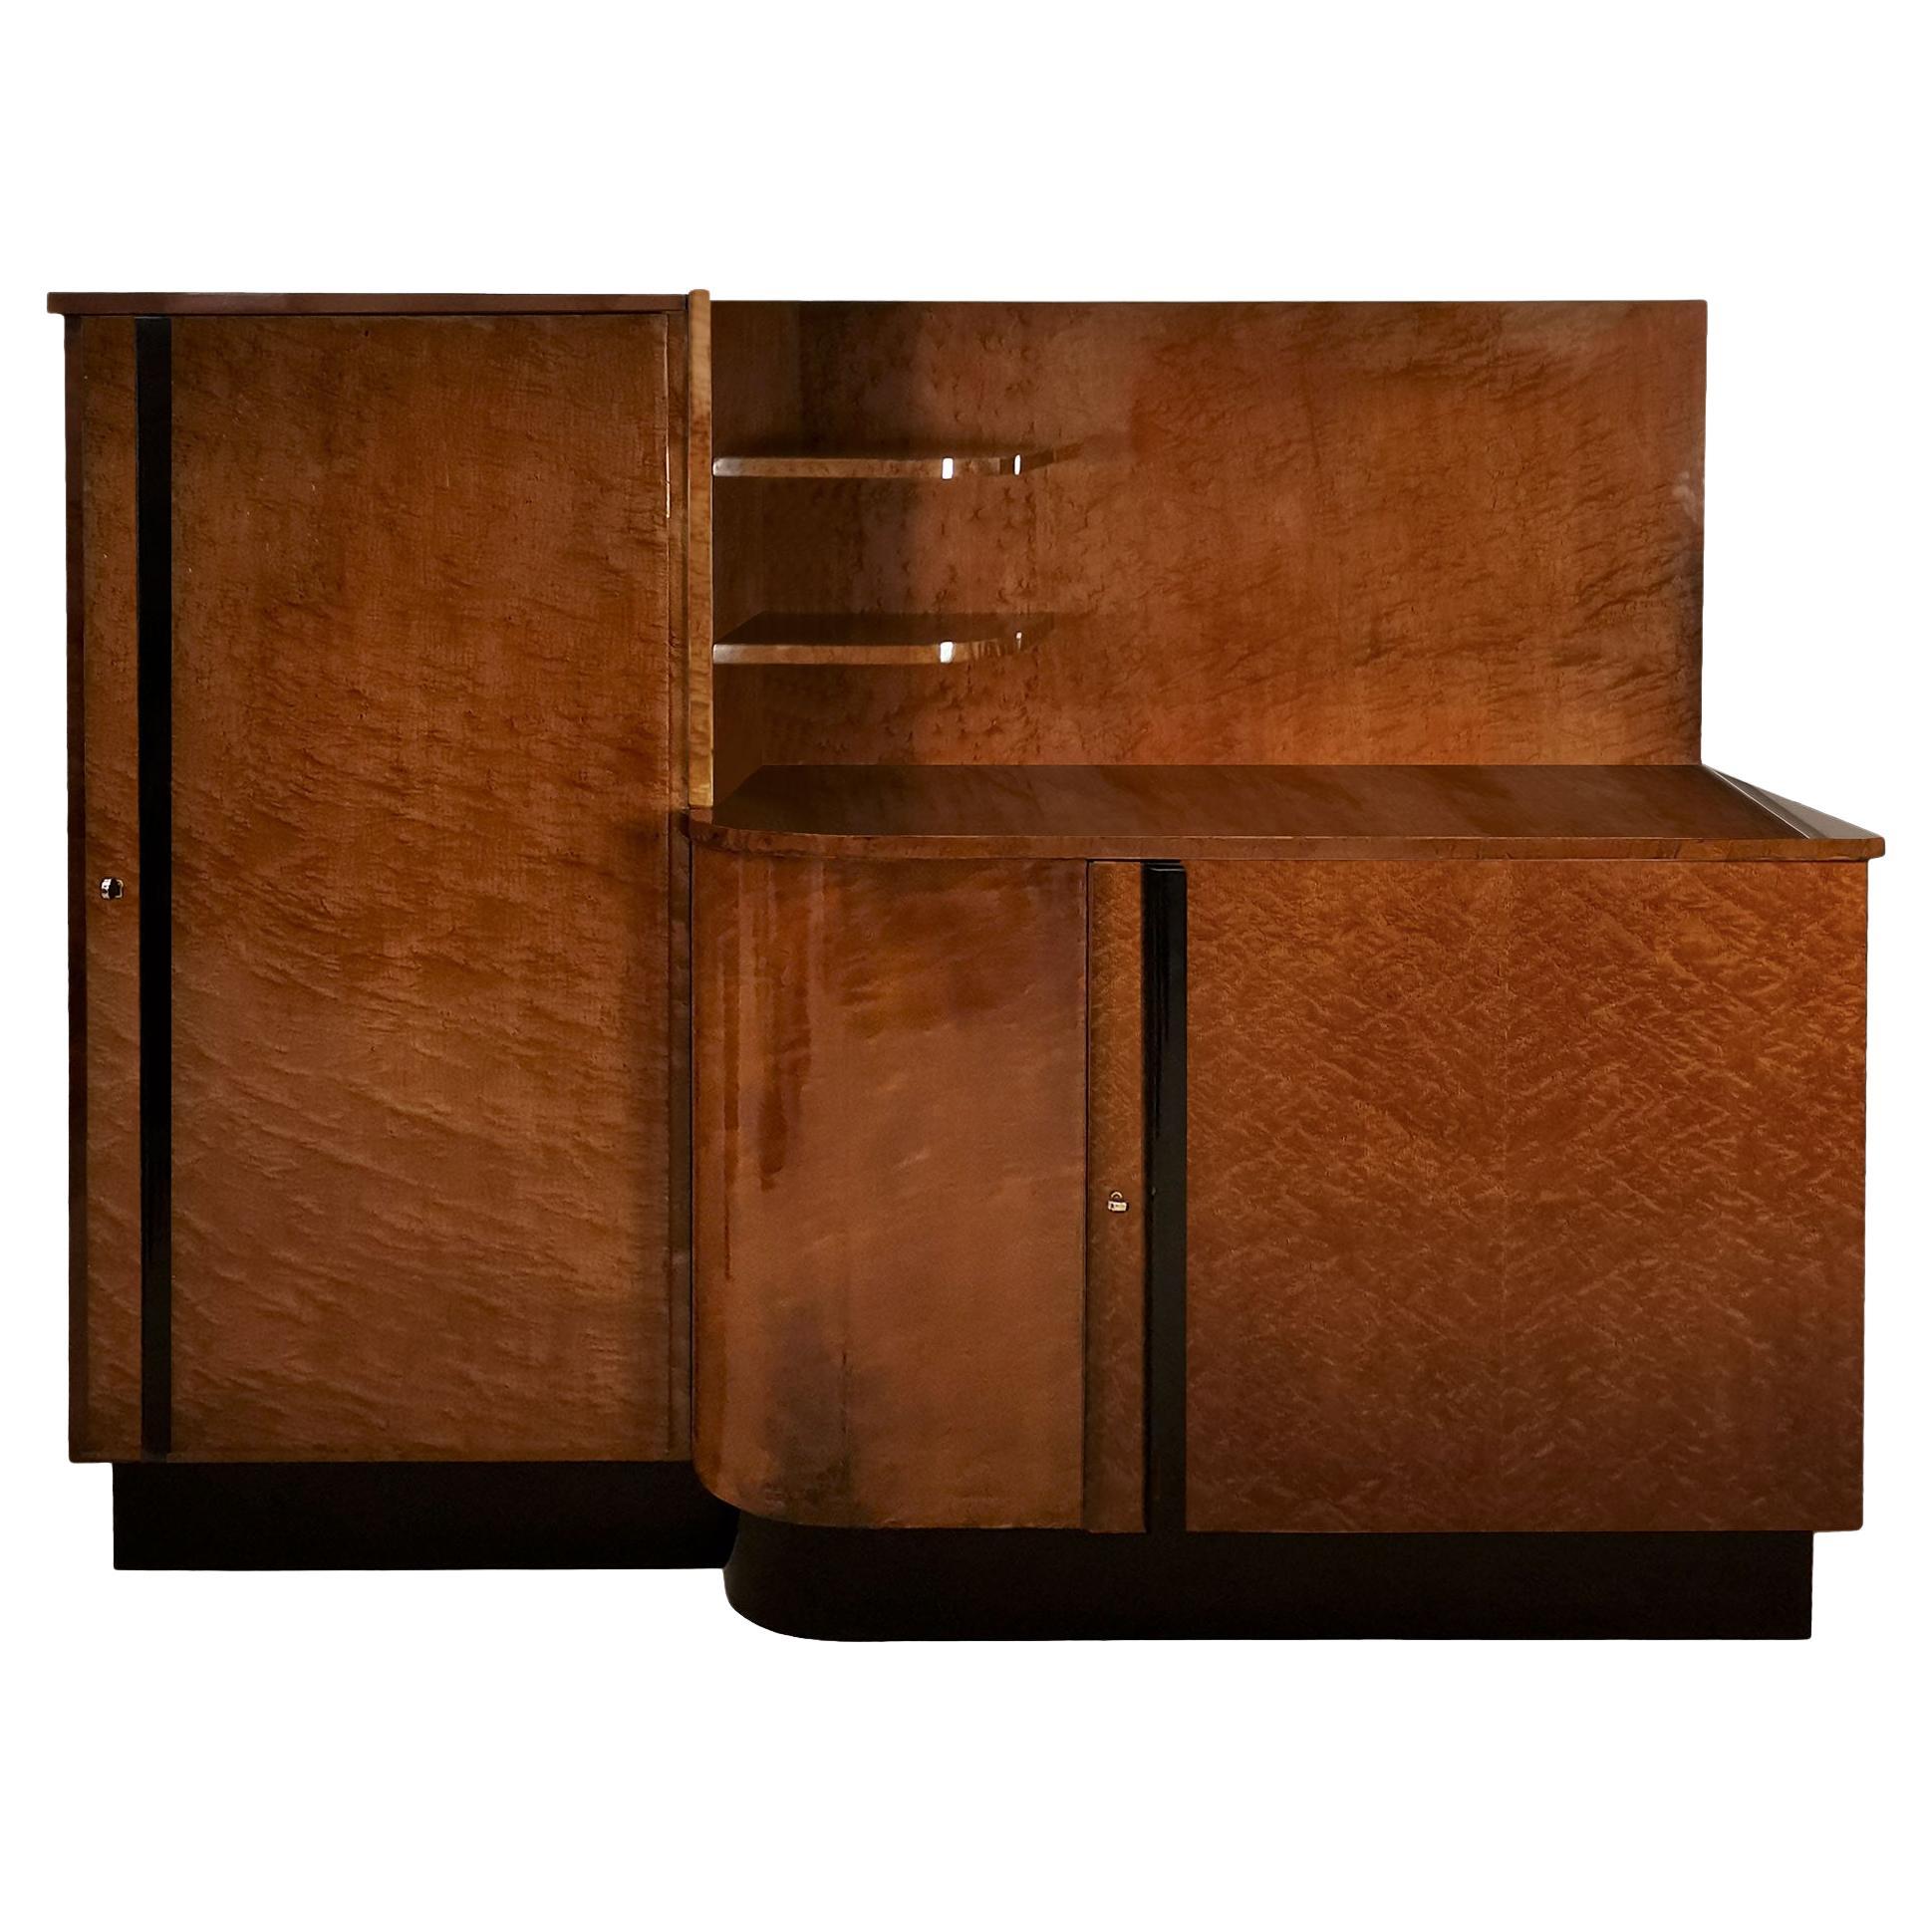 Large Art Deco Sideboard Cabinet in Speckled Mahogany - Italy 1930